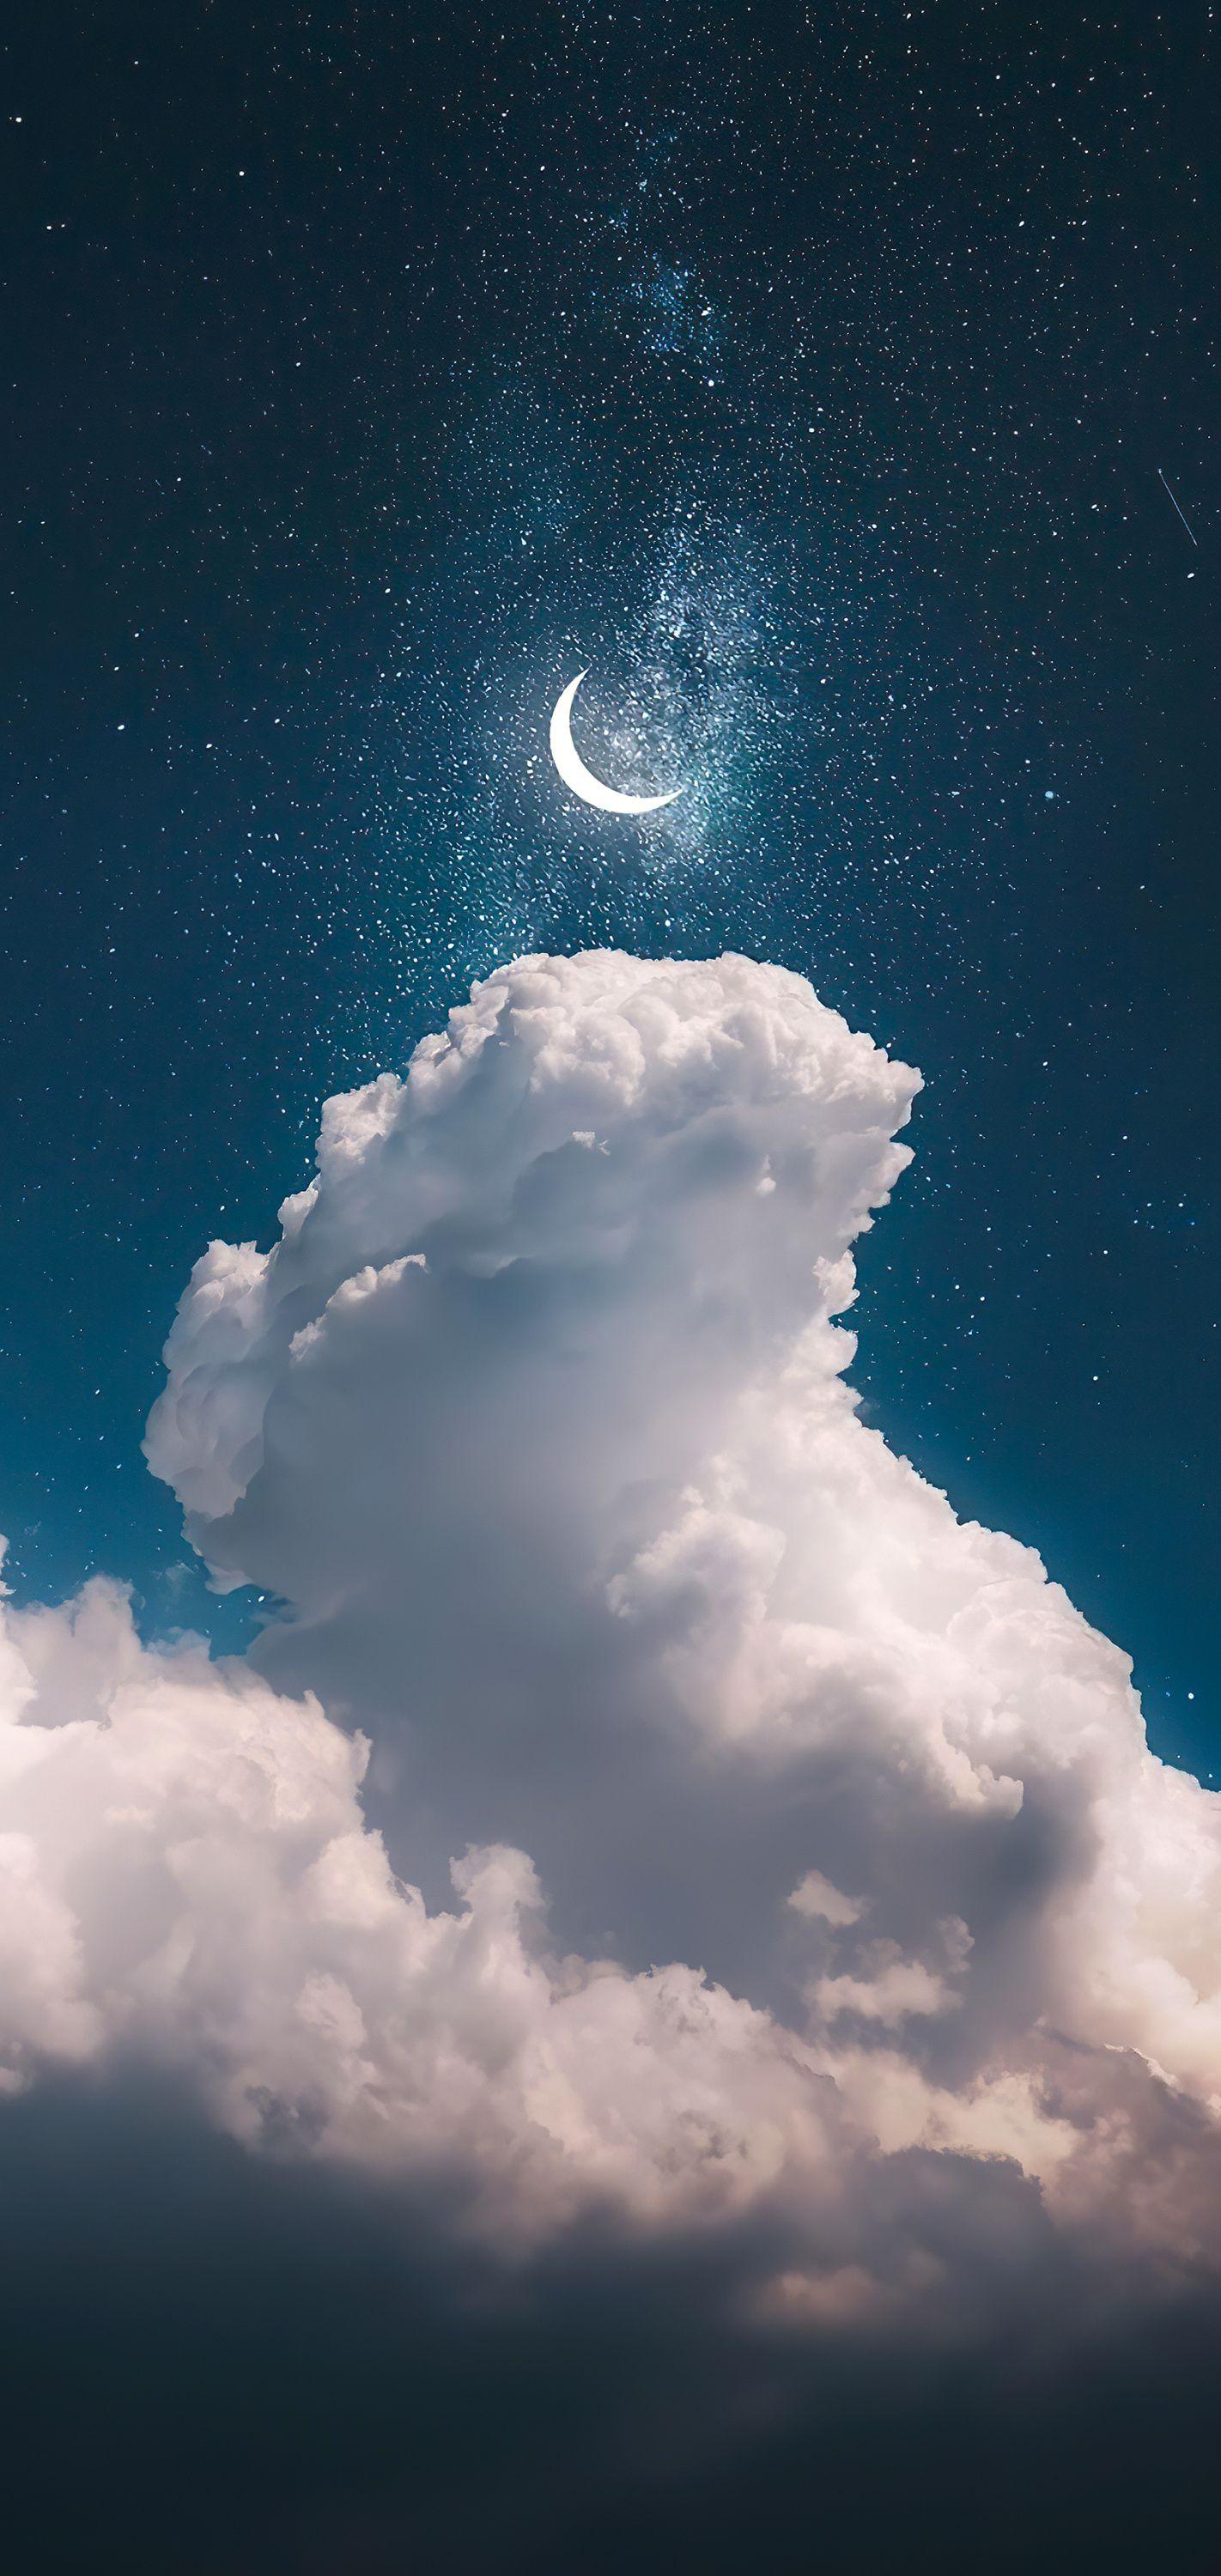 Cloudy Night Sky Wallpapers - Top Free Cloudy Night Sky Backgrounds